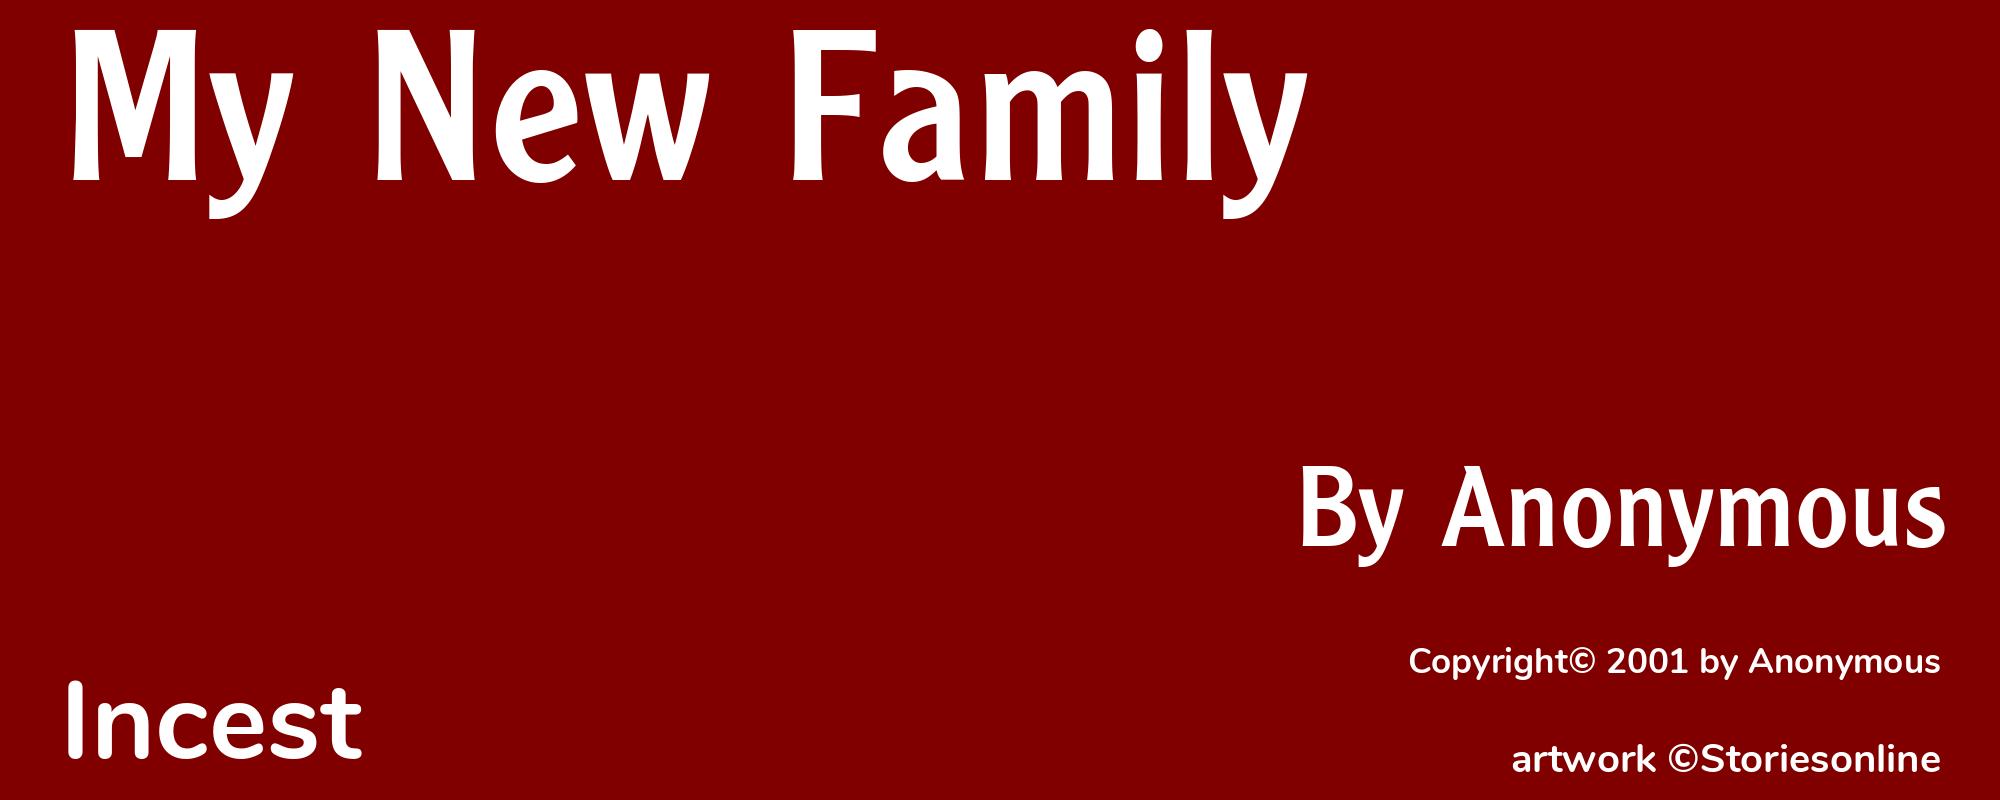 My New Family - Cover